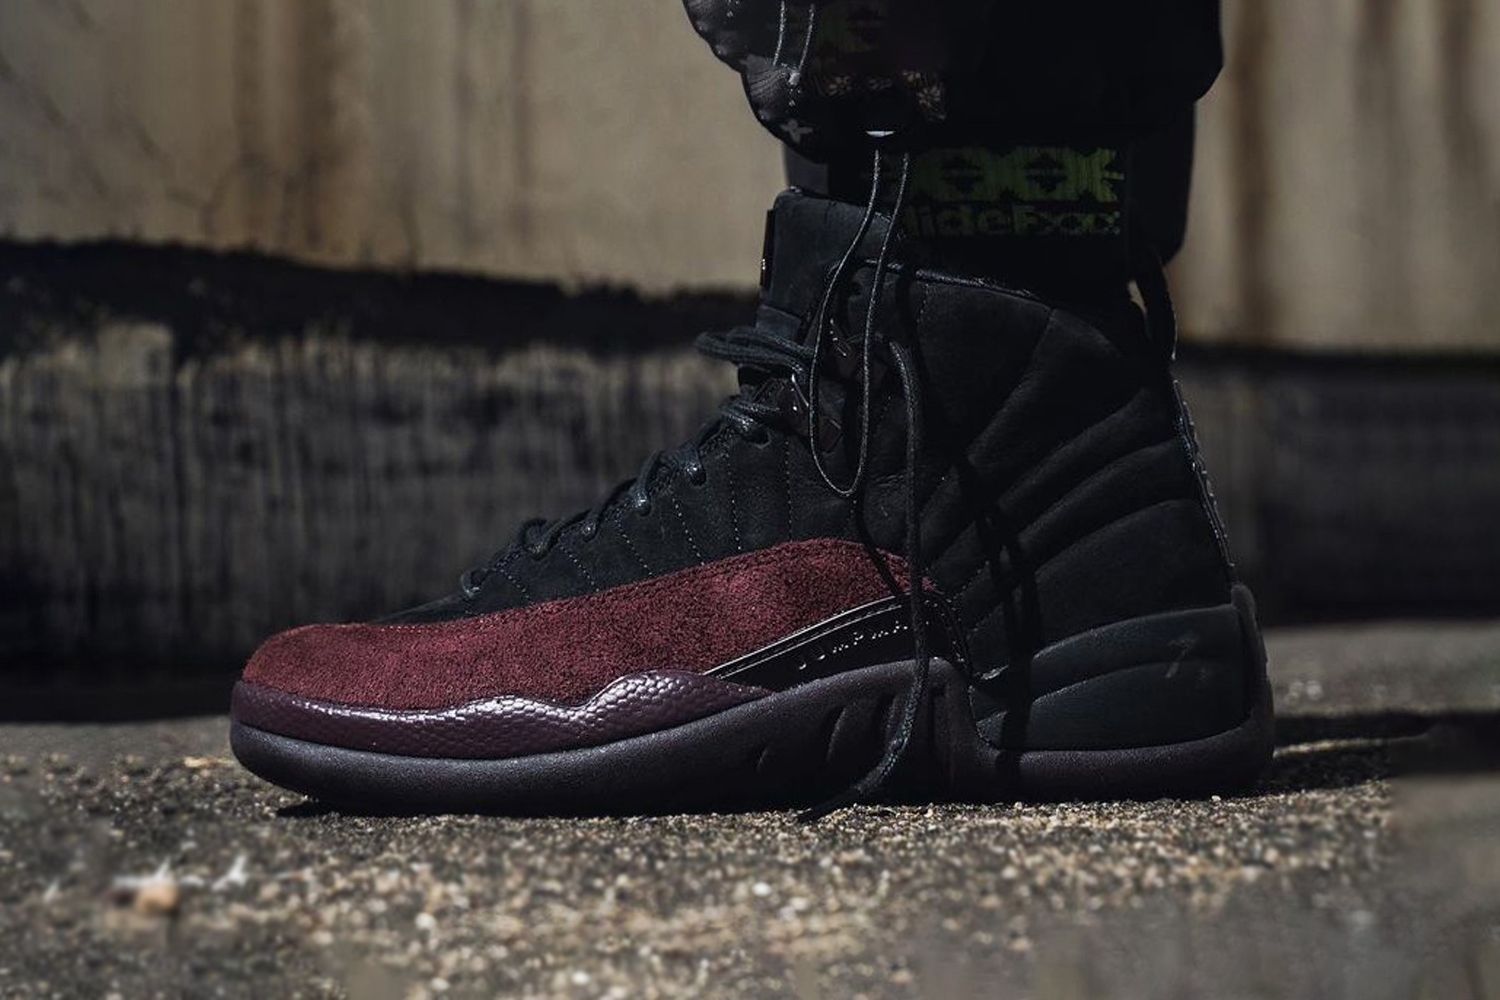 First on-feet pictures A Ma Maniére x Air Jordan 12 'Black'